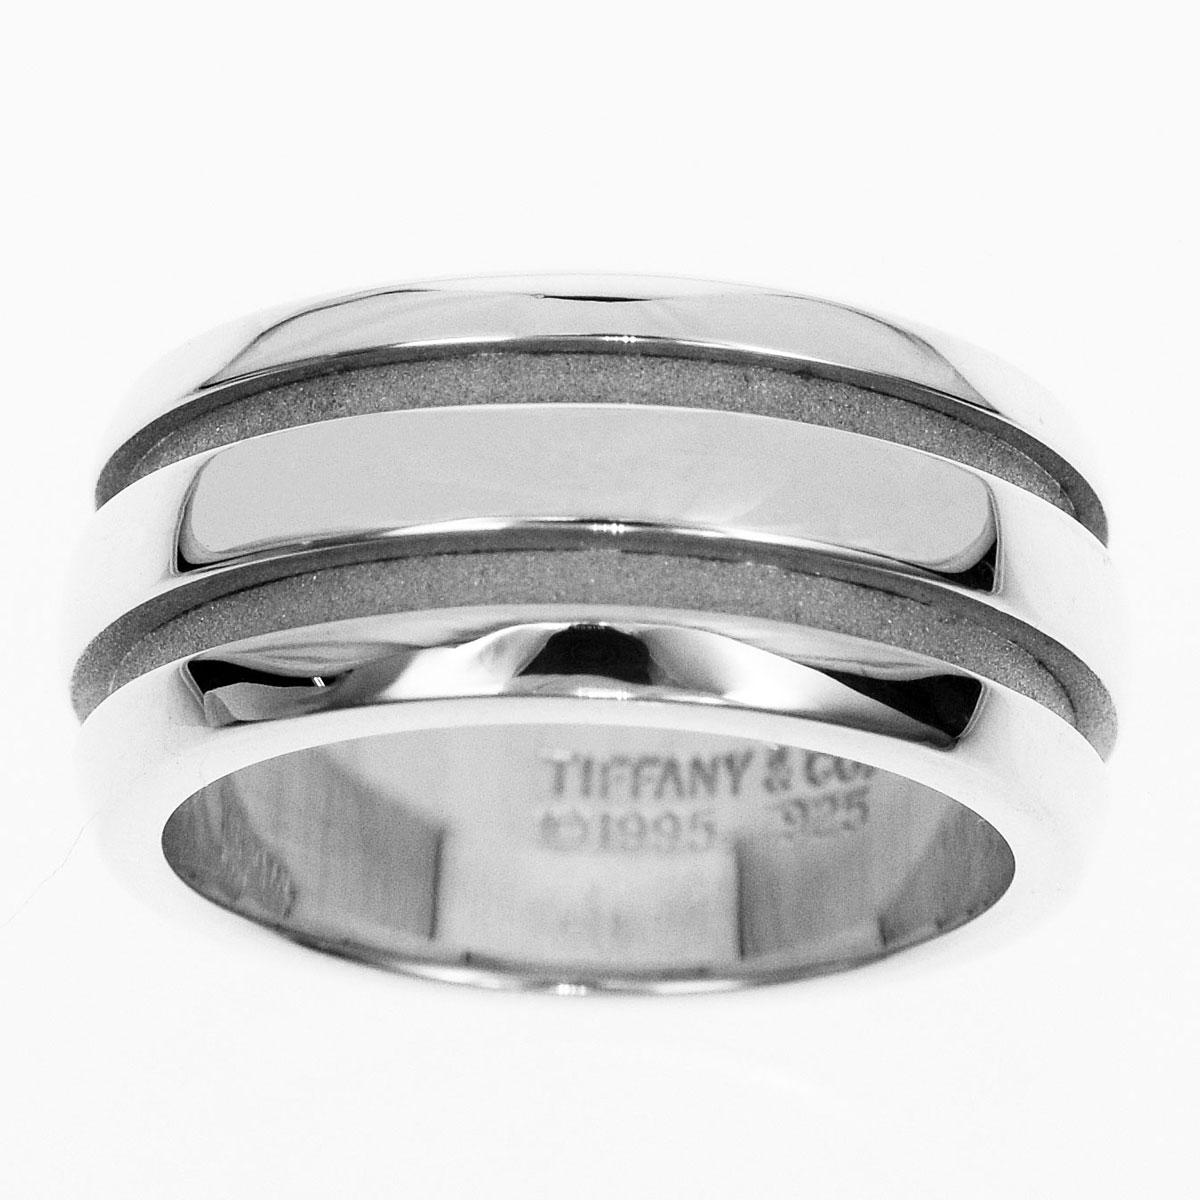 BrandTIFFANY&Co.
Name:1995 Double Line Band Ring
Material:925 SV Sterling Silver
Weight:9.7g（Approx)
Ring size:British & Australian:L 1/4  /   US & Canada:5 3/4 /  French & Russian:51 /  German:16.2 /  Japanese:  11 /Swiss: